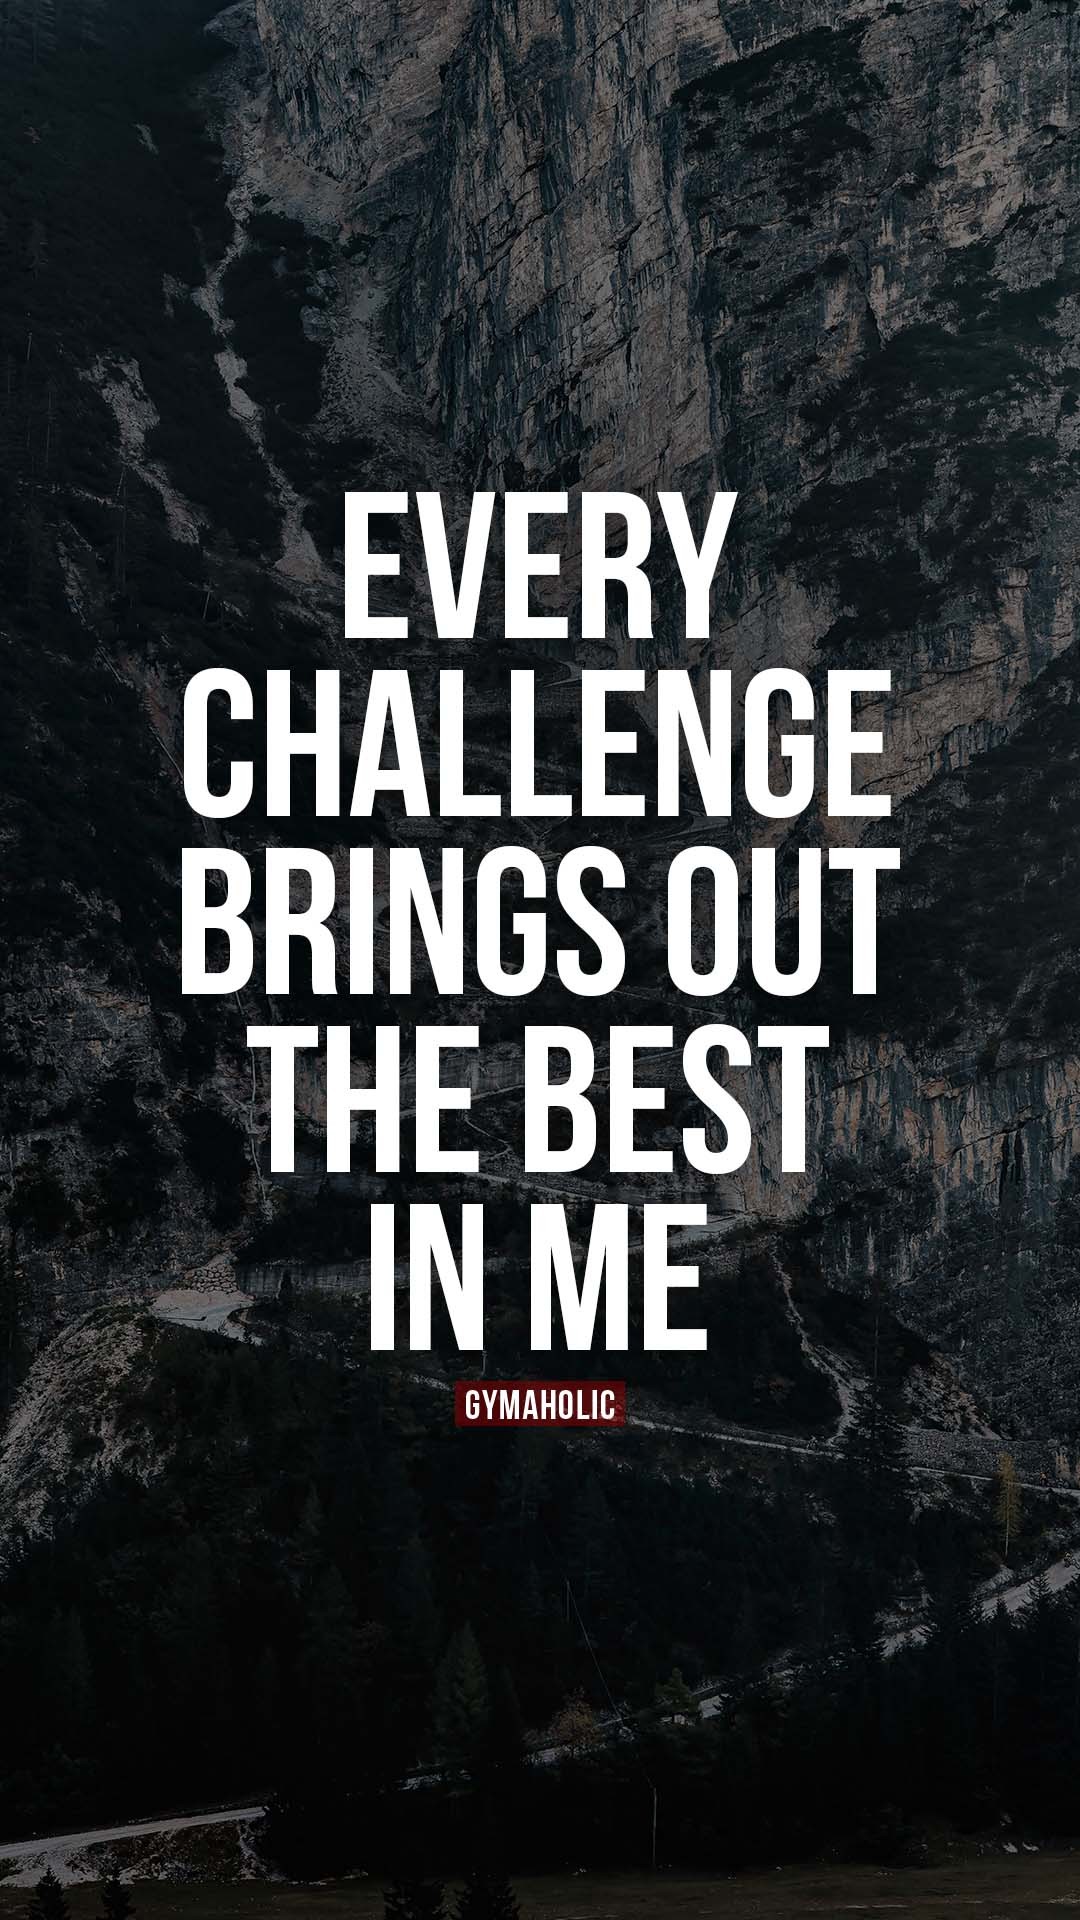 Every challenge brings out the best in me. #gymaholic